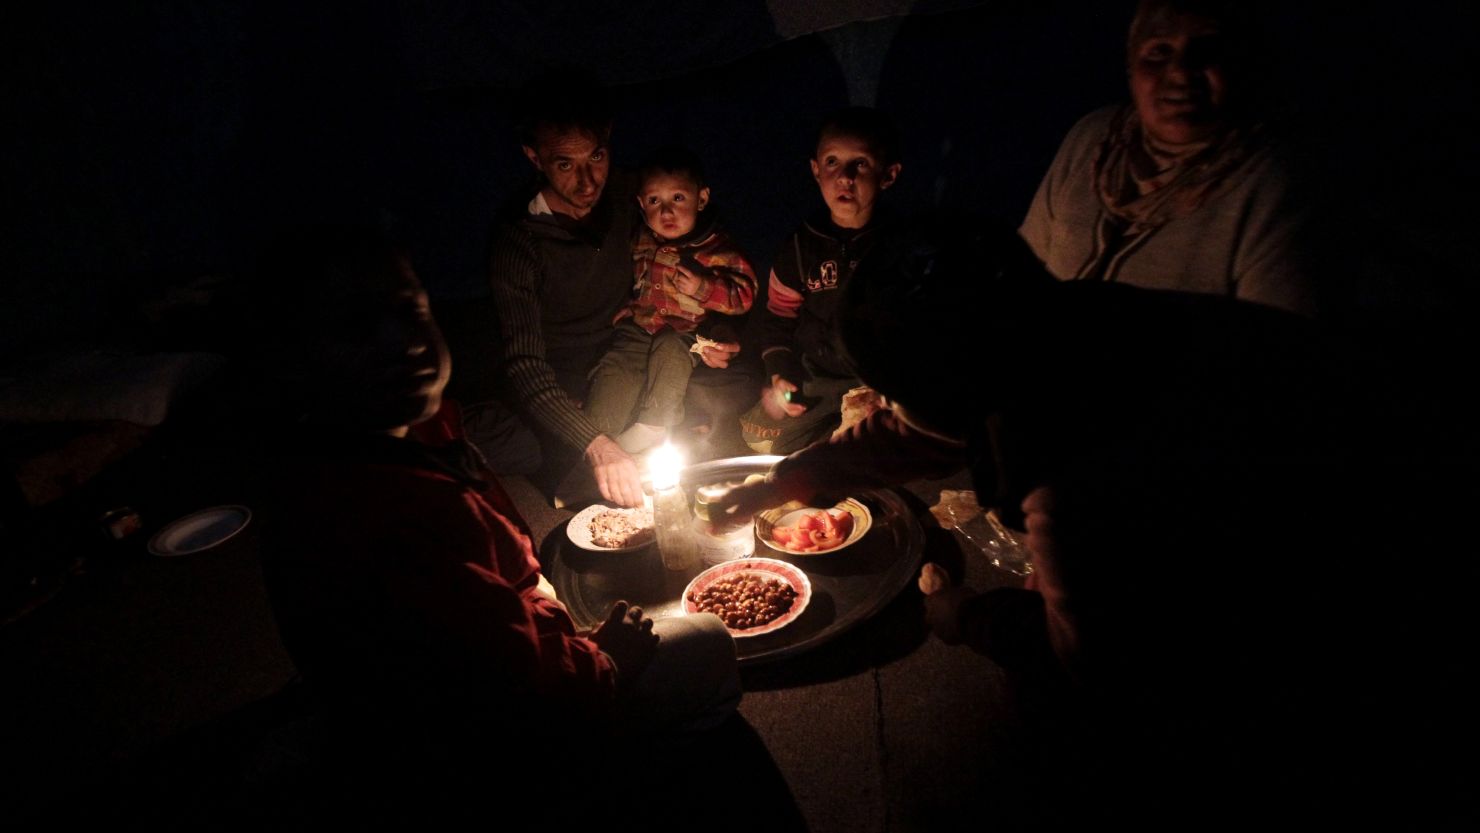 A Syrian family who fled the violence in Homs' Baba Amr neighborhood eats dinner during a blackout at a refugee center.